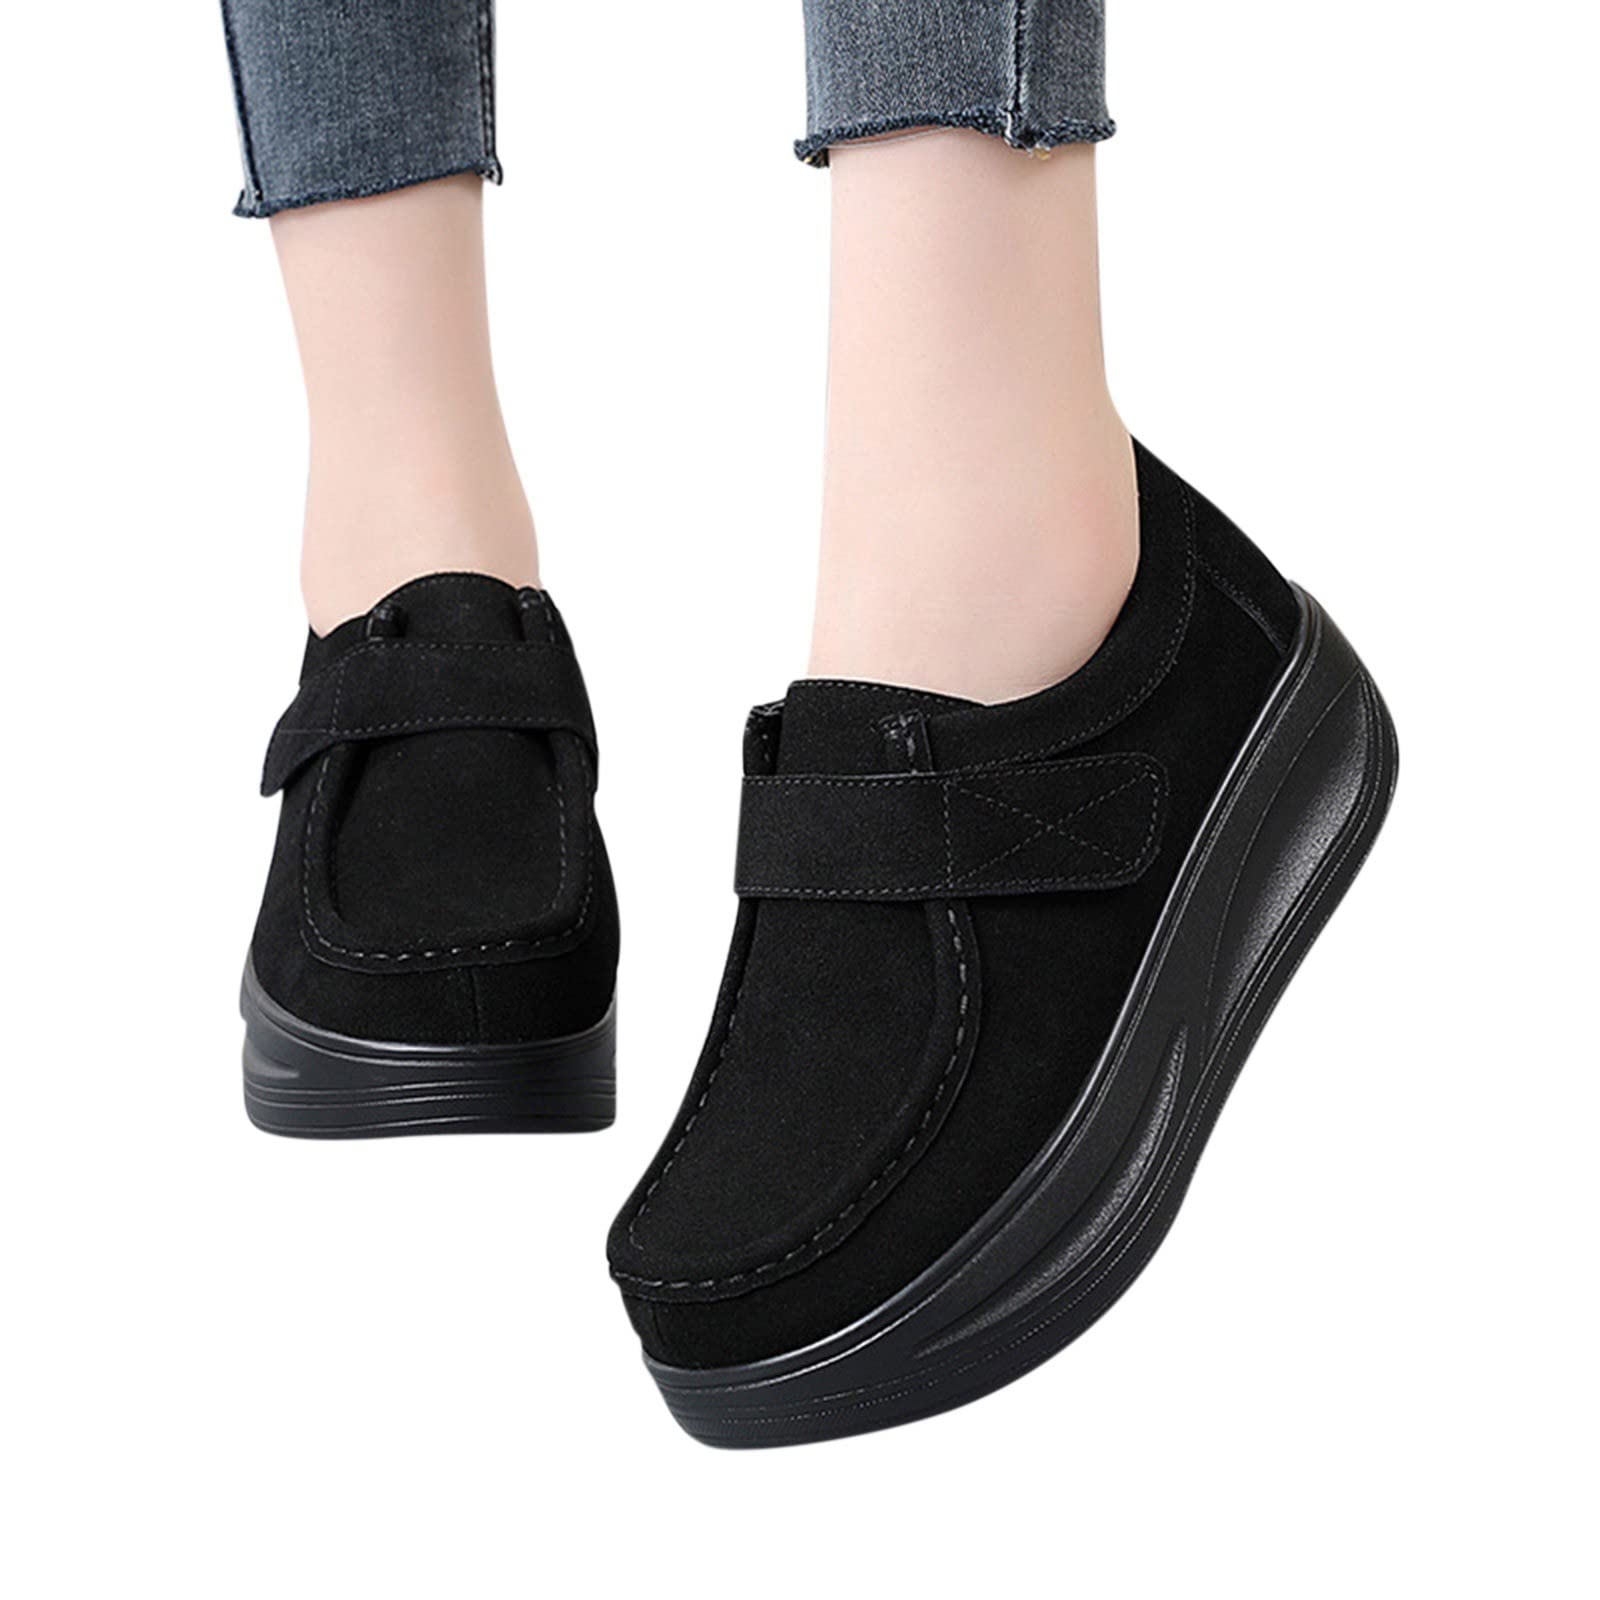 Women's Slip On Shoes, Casuals, Work, Dress